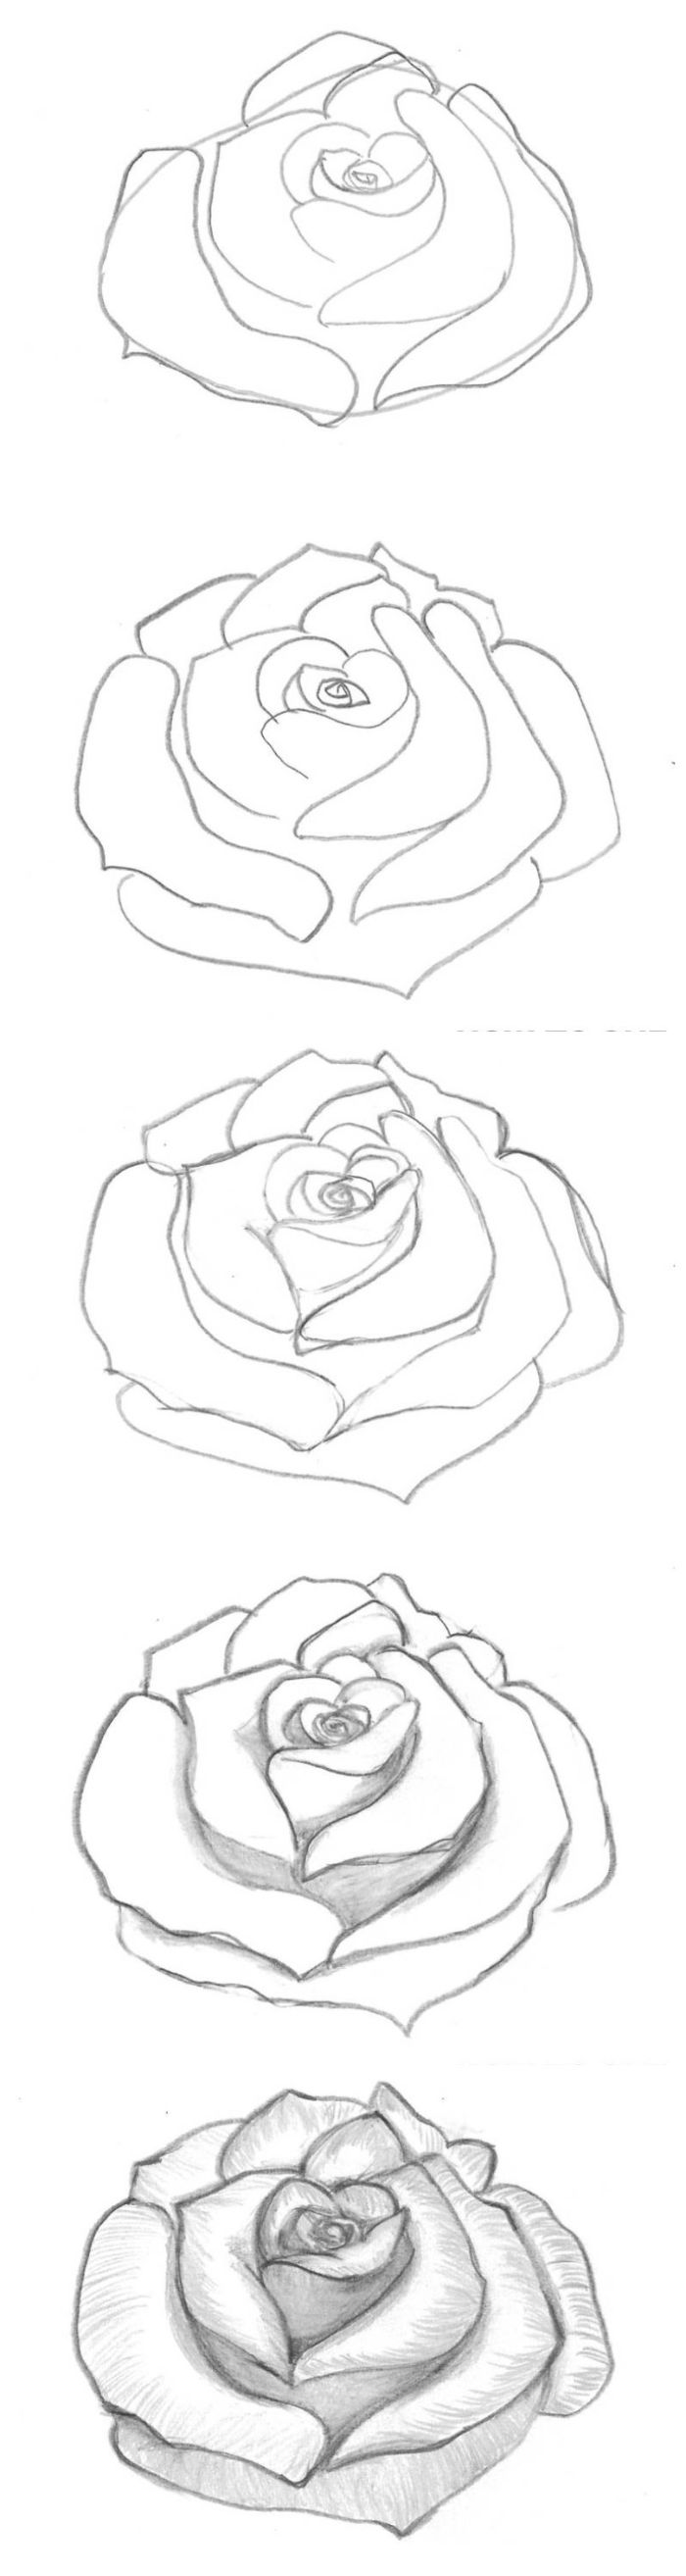 five step photo collage of diy tutorial how to draw a flower step by step black and white pencil sketch